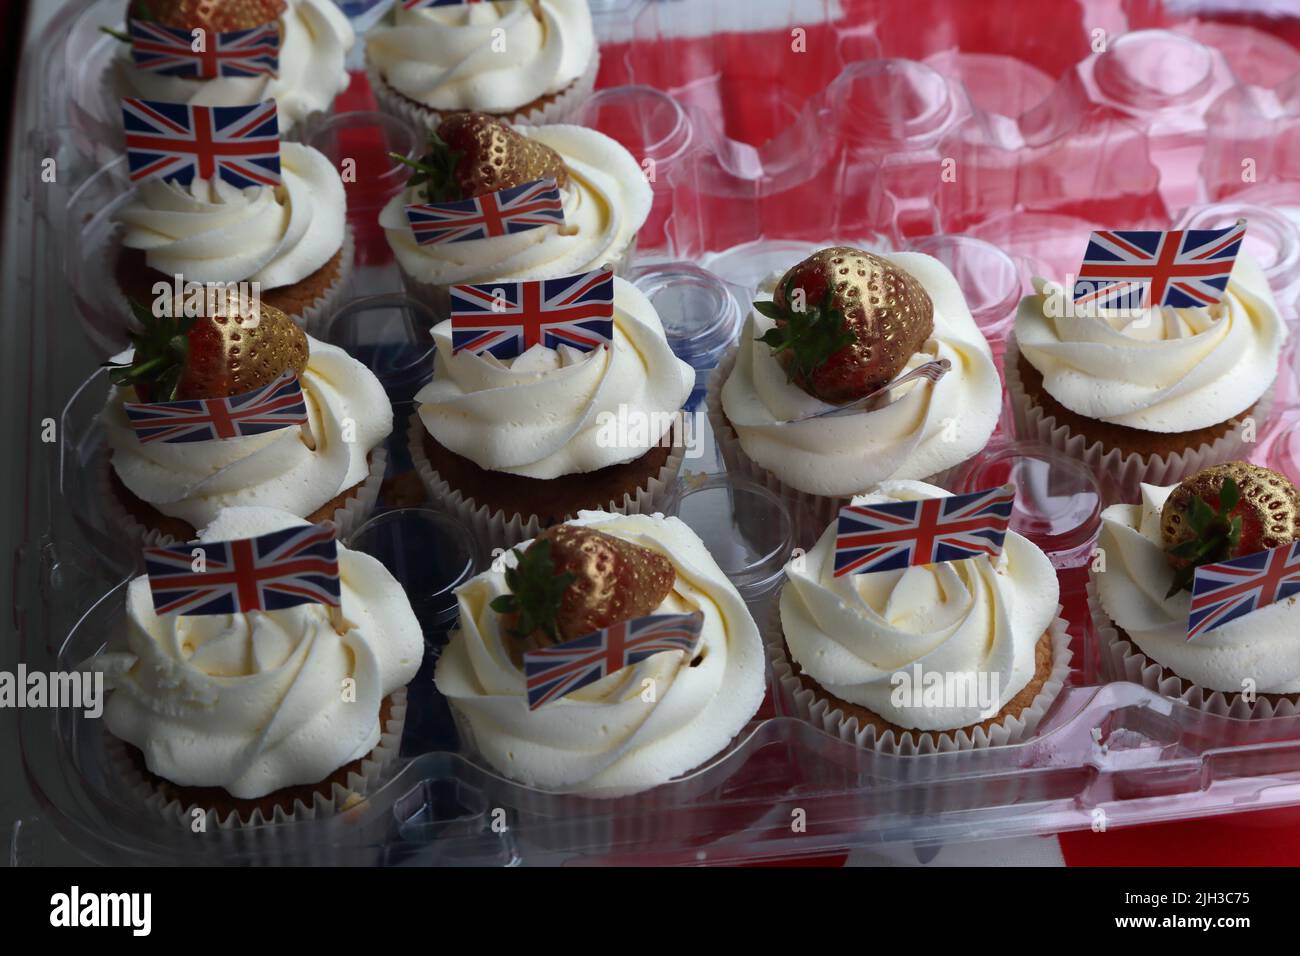 Homemade Cupcakes with Golden Strawberries and Union Jack Flags at Street Party Celebrating Queen Elizabeth II Platinum Jubilee Surrey England Stock Photo